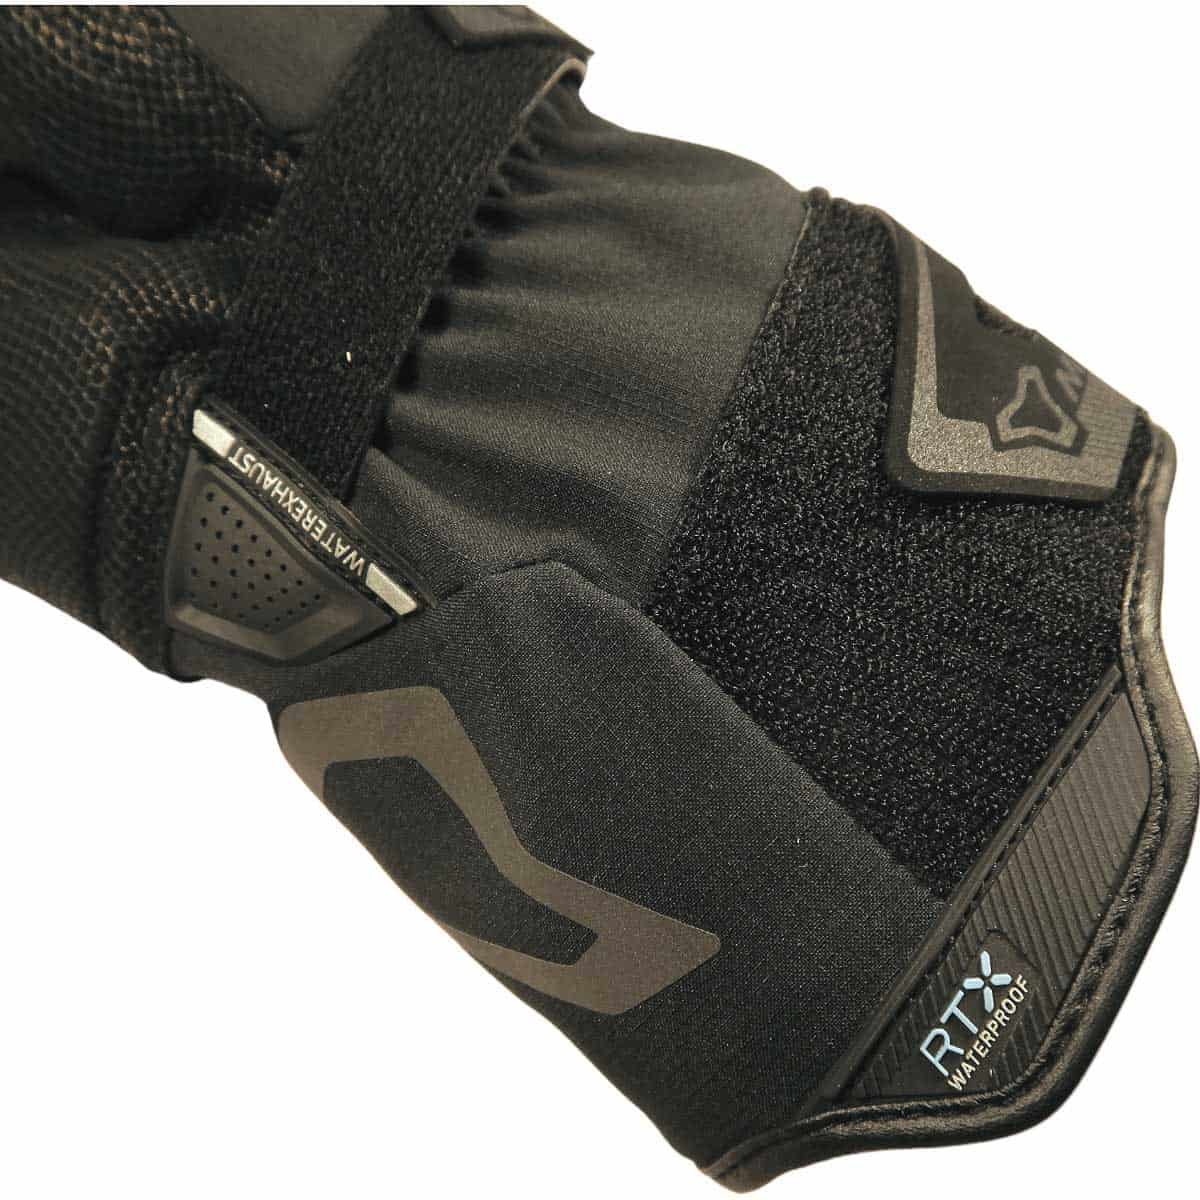 Macna Azra RTX Heated Gloves Kit: A pair of Azra gloves bundled with a 7.4V / 2.2A batteries & charger pack- cuff 1